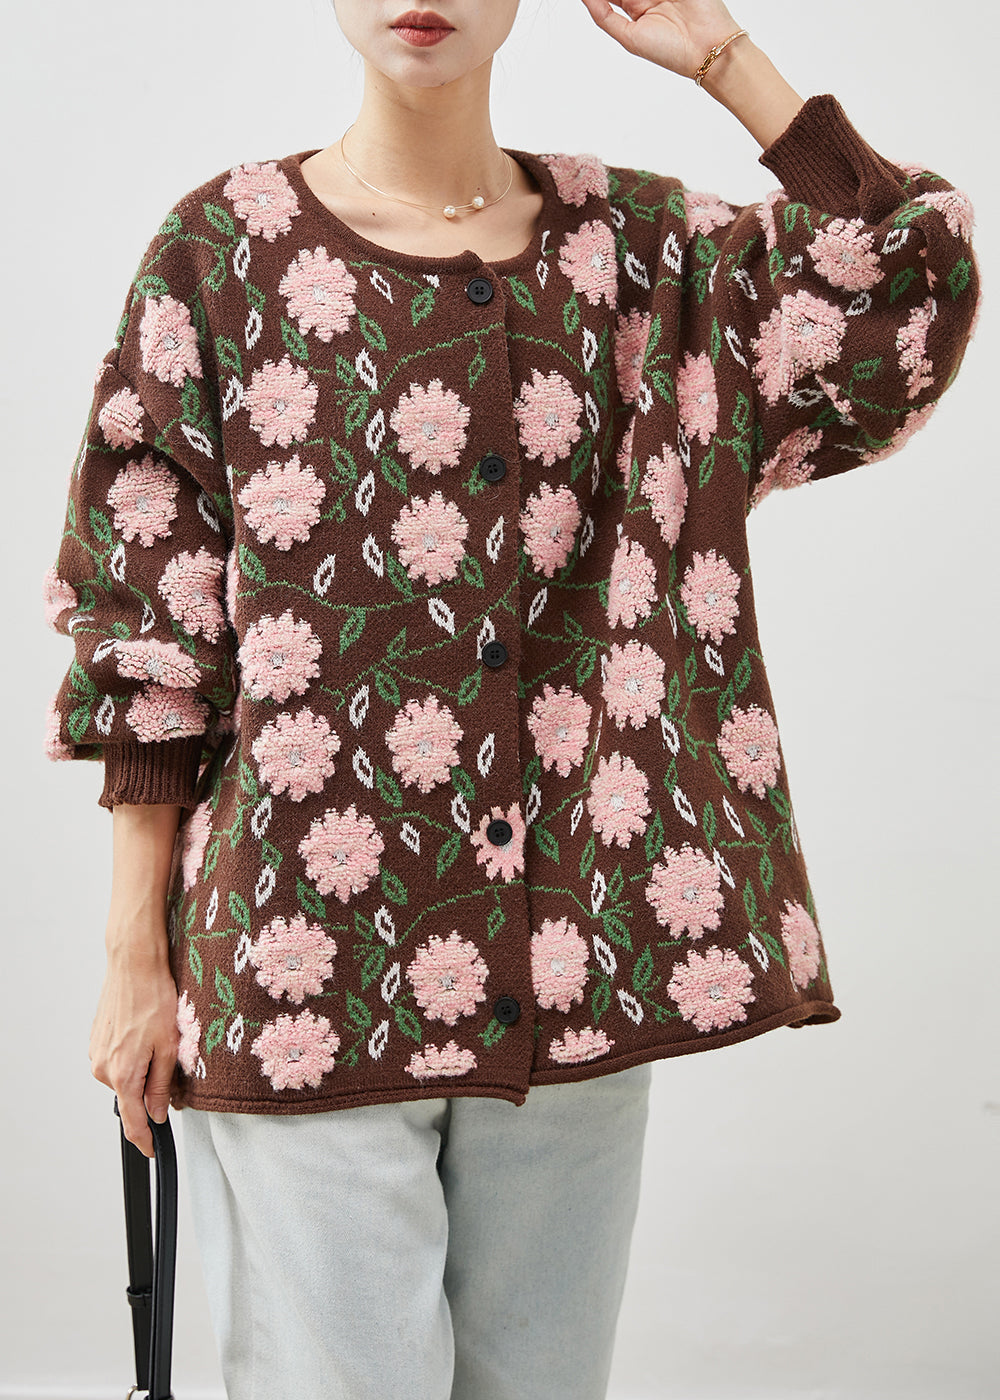 Simple Coffee Oversized Floral Jacquard Knit Cardigan Winter